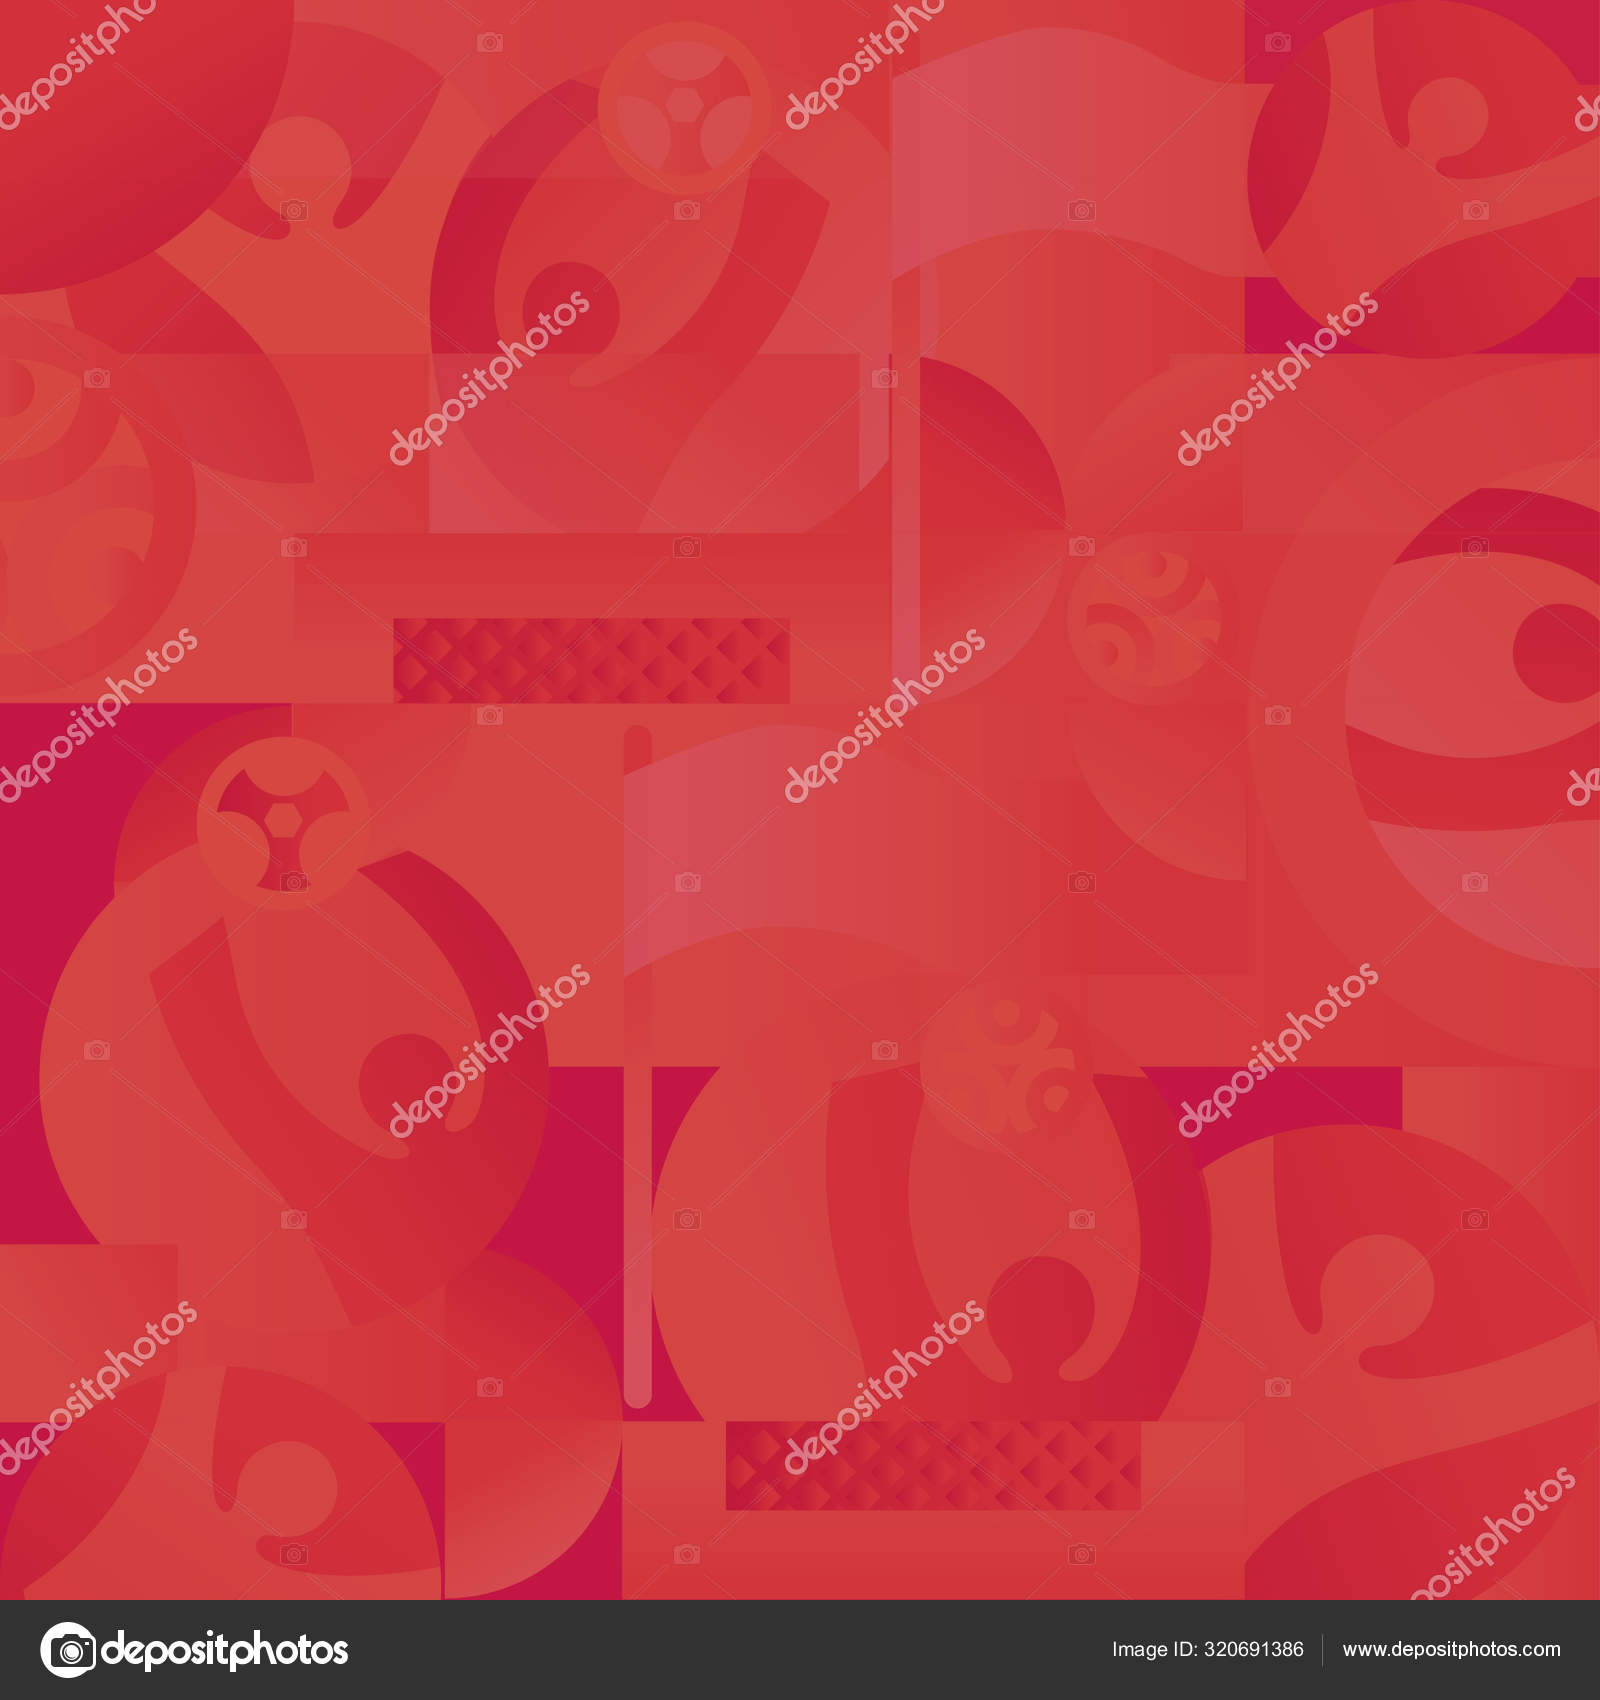 Soccer European Championship Abstract Red Background Soccer Seamless Pattern Stock Vector C Sofiartmedia Gmail Com